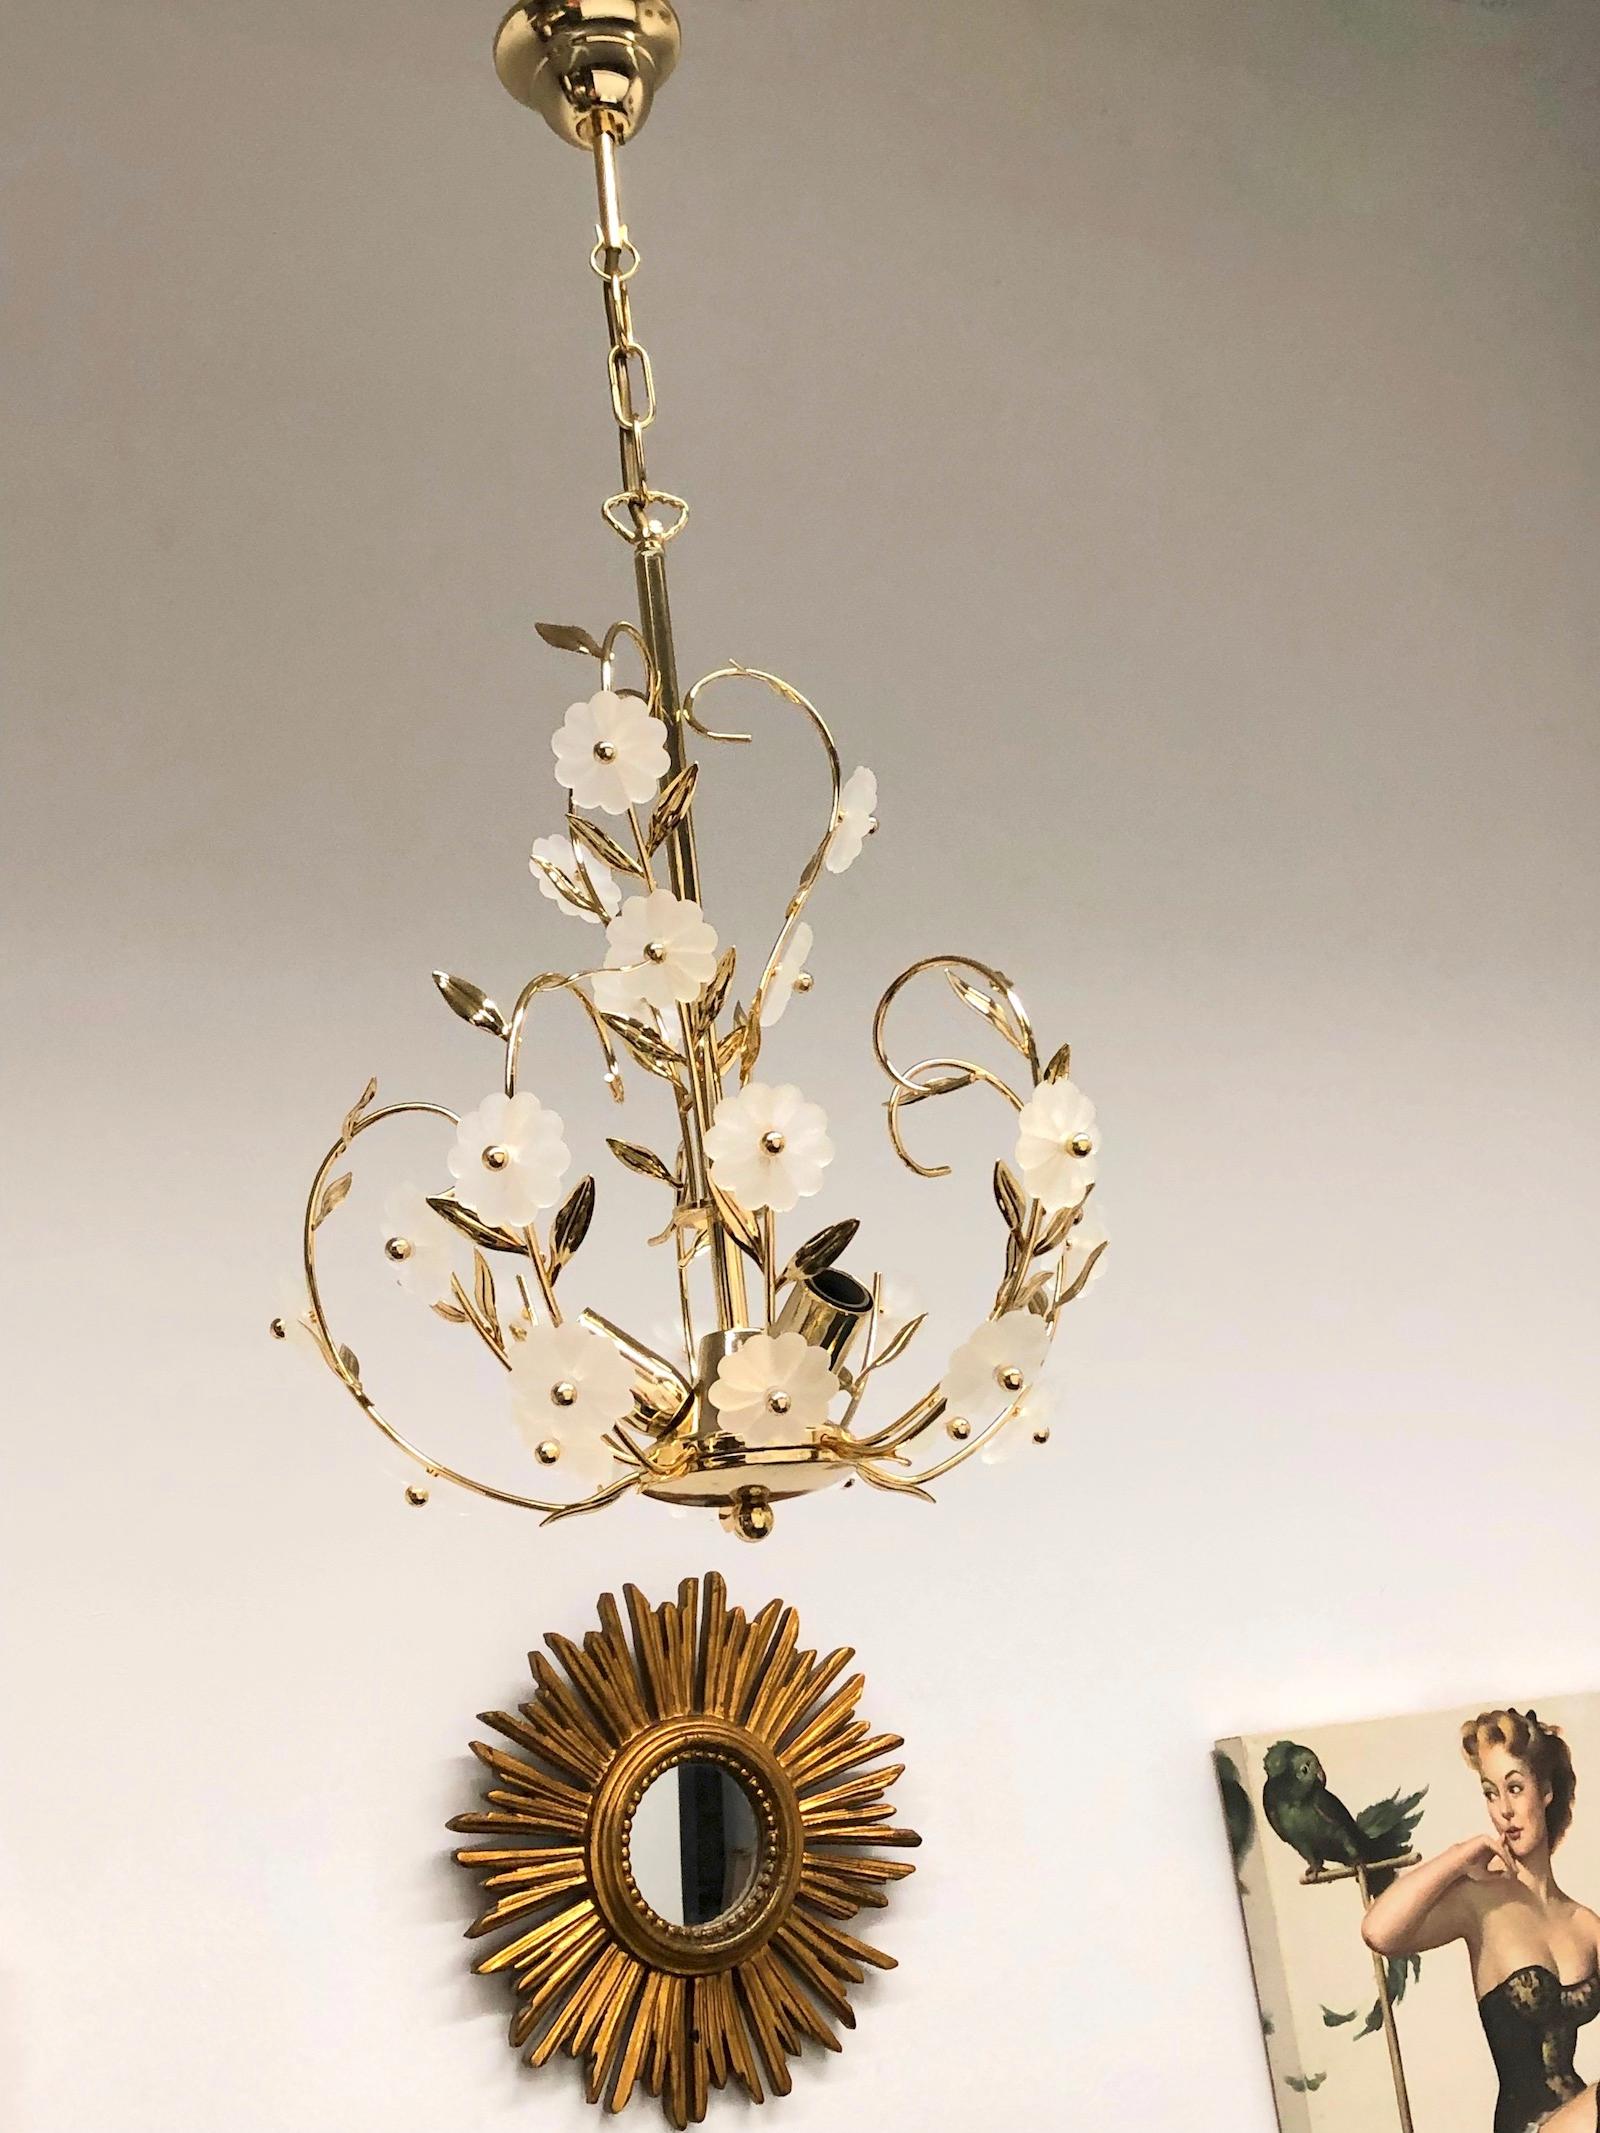 A beautiful brass and glass flower chandelier made by Soelken Leuchten, Germany, 1960s. The chandelier requires three European E14 candelabra bulbs, each up to 40 watts. It is made of Murano glass flowers and a brass frame.
This beauty will look